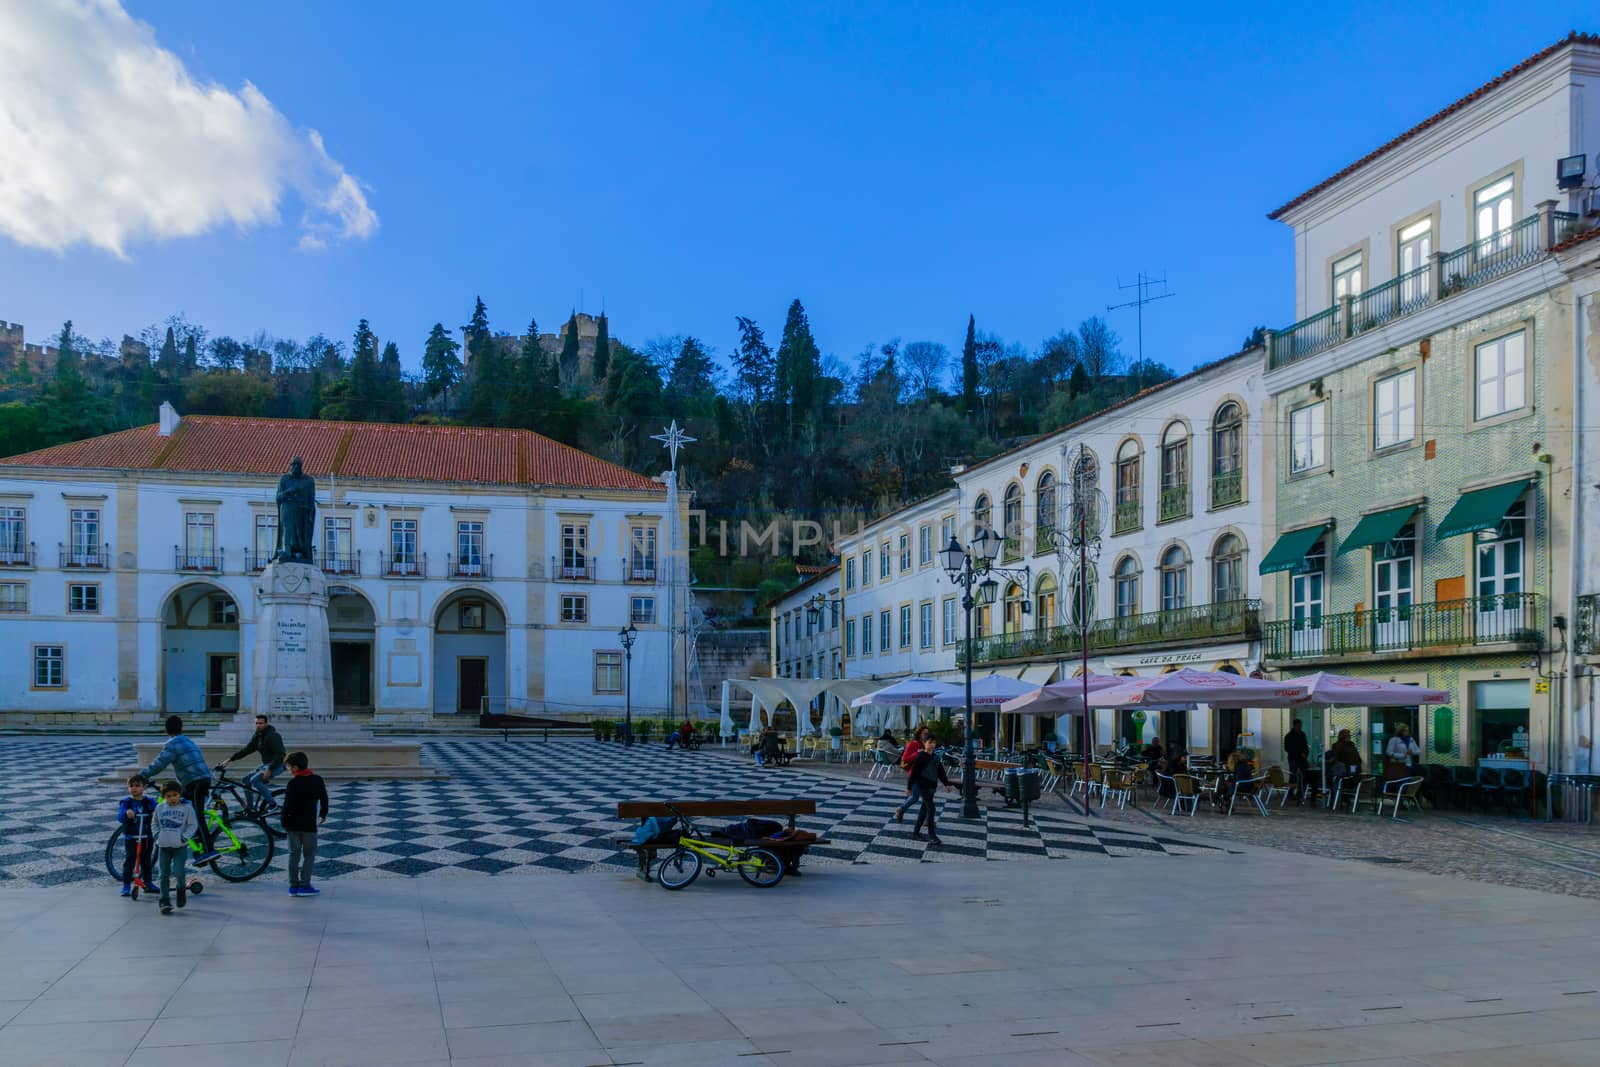 TOMAR, PORTUGAL - DECEMBER 27, 2017: Scene of the main square (praca da republica), and the town hall, with locals and visitors, in Tomar, Portugal